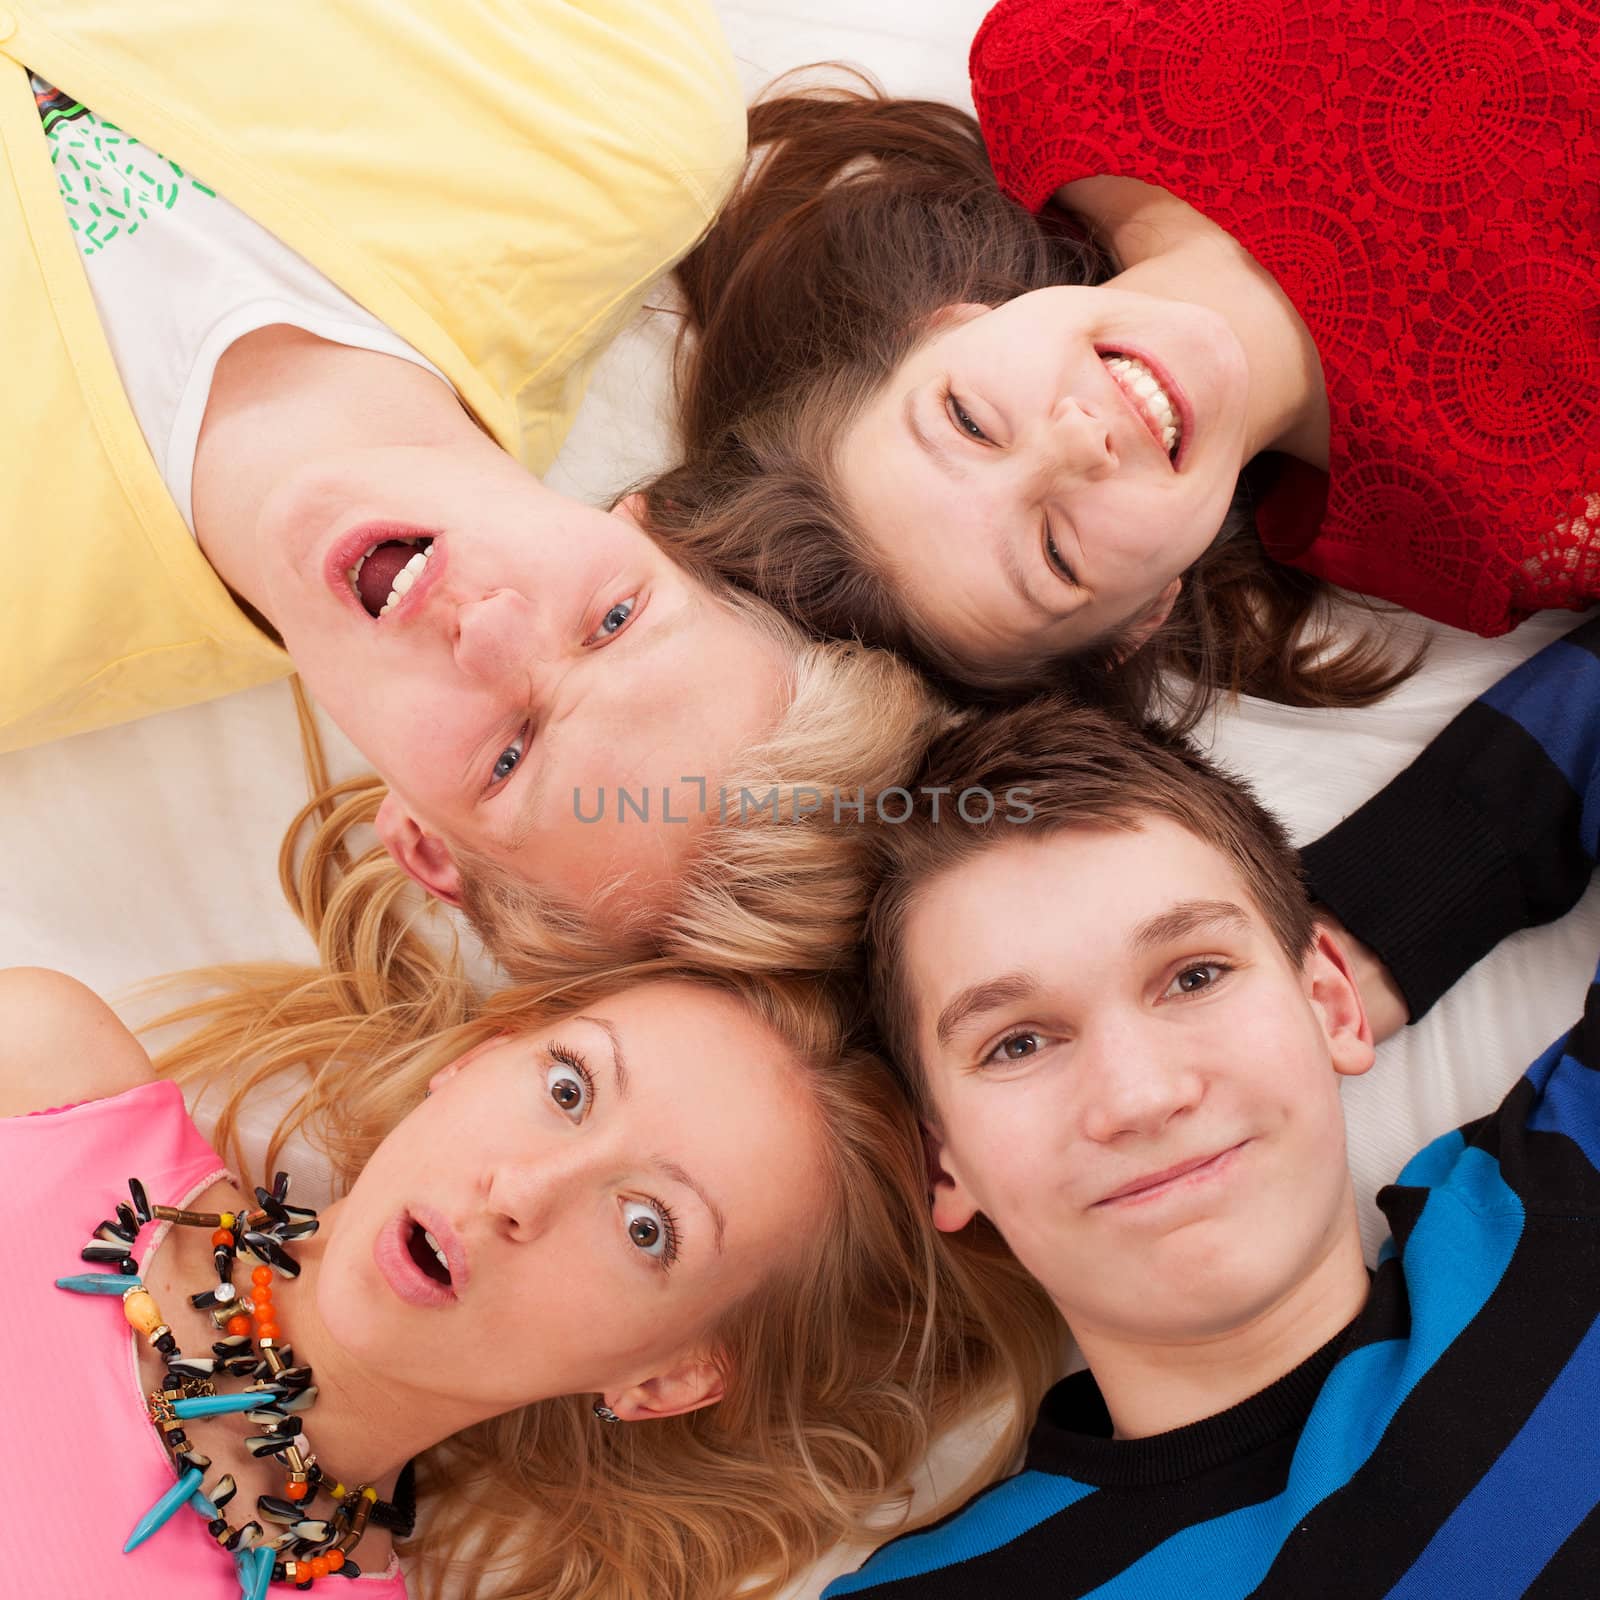 Brothers and sisters lying on a floor together